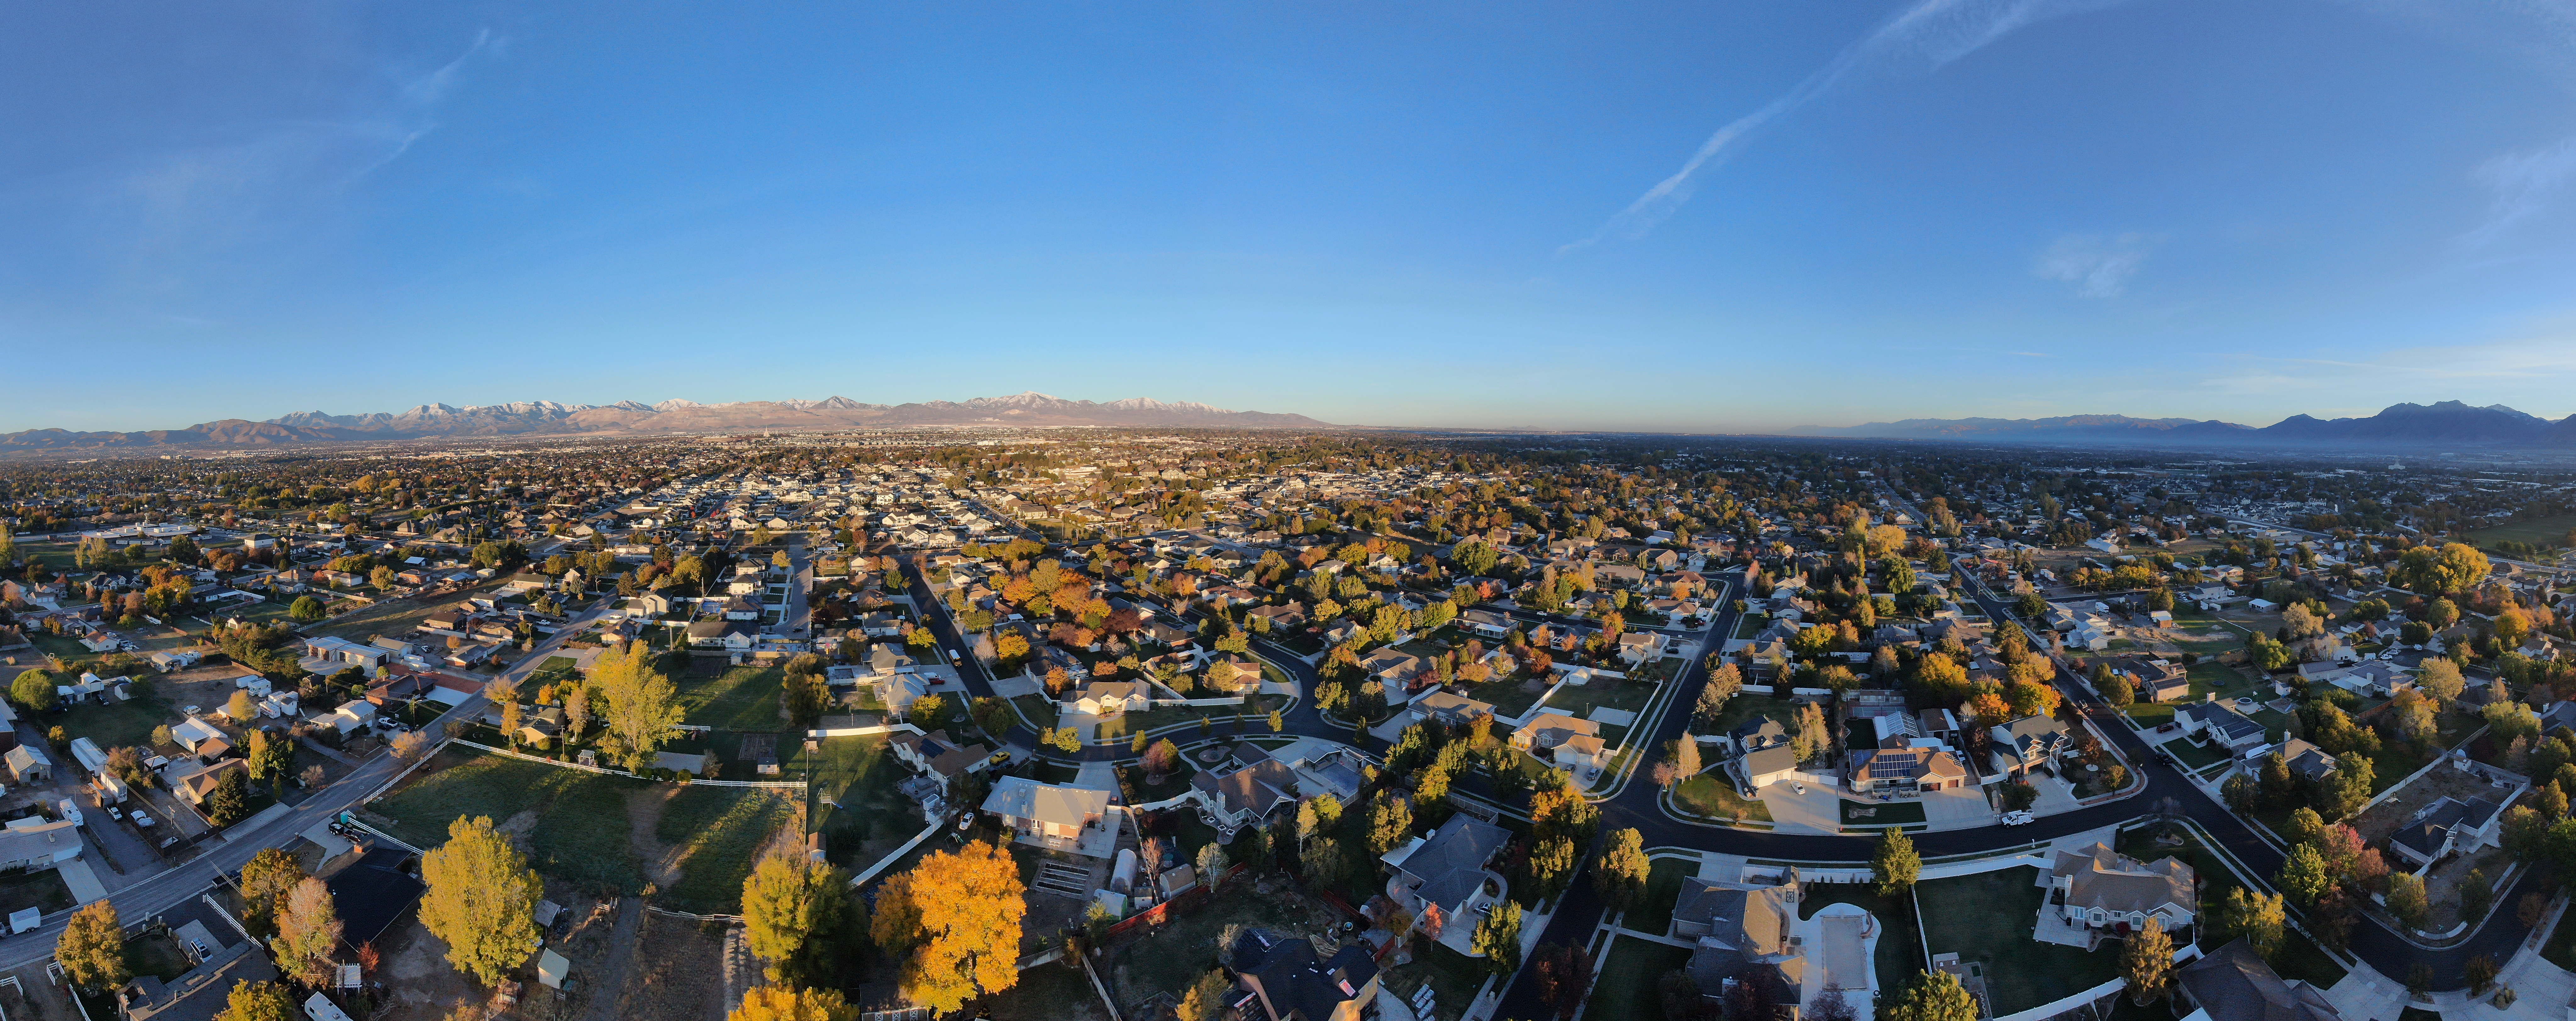 What is Housing going to do this fall in Salt Lake County?